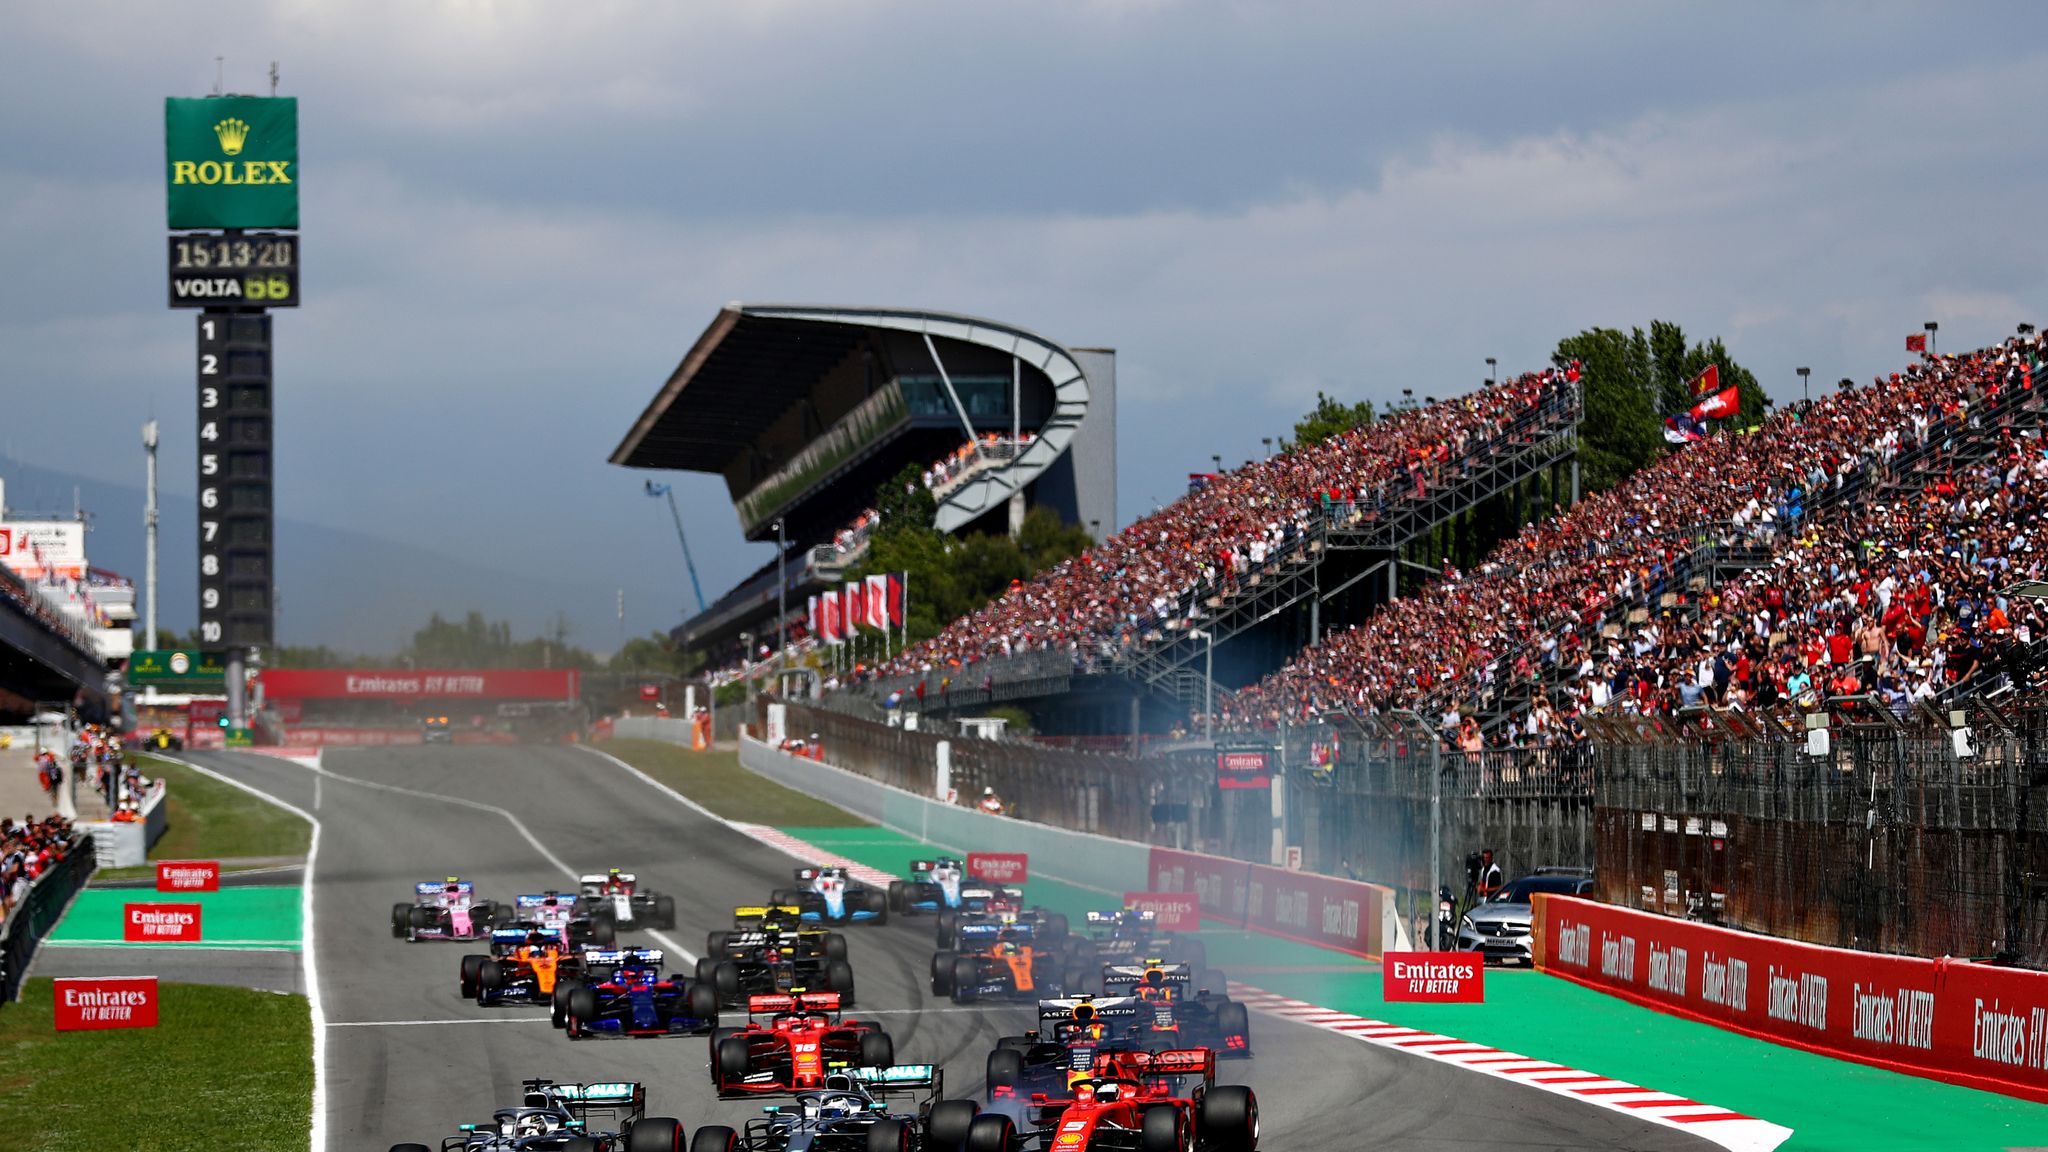 Spanish GP secures F1 stay 2020 Germany in doubt |